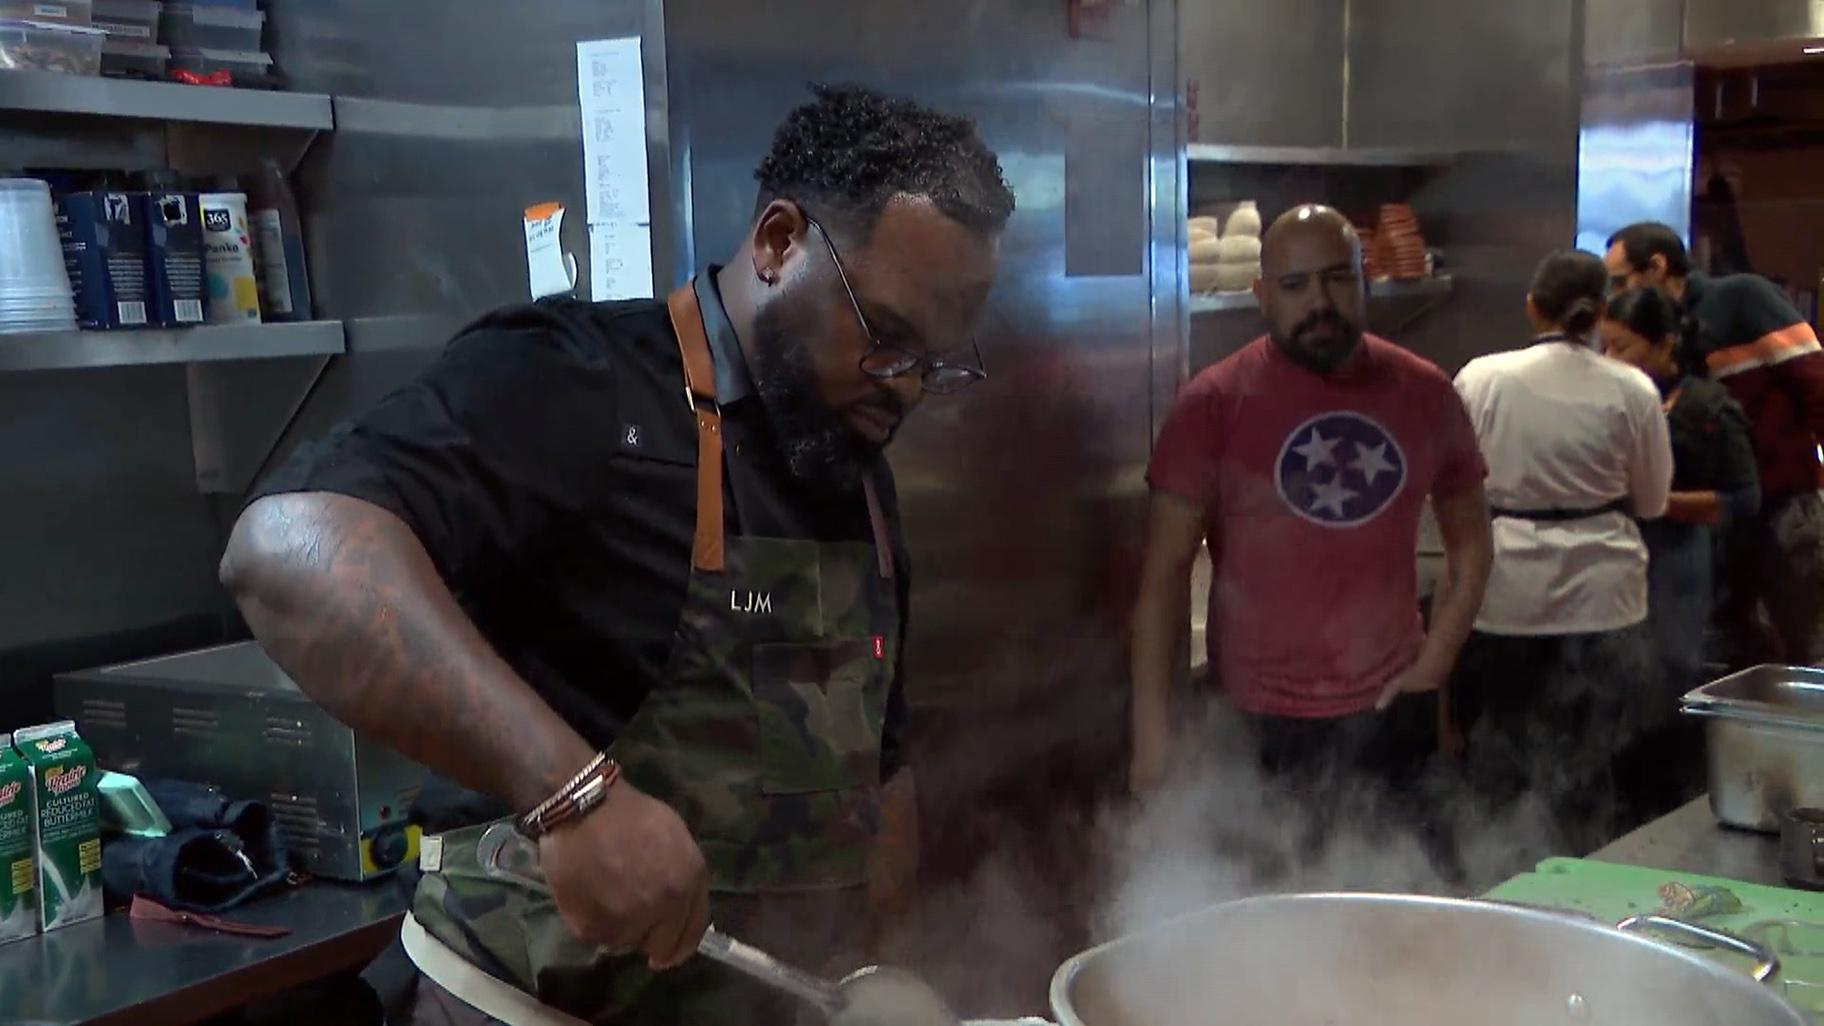  Chef Lamar Moore is known for many things, including appearing on a number of popular culinary competition shows. He was born and raised on the South Side of Chicago. (WTTW News)